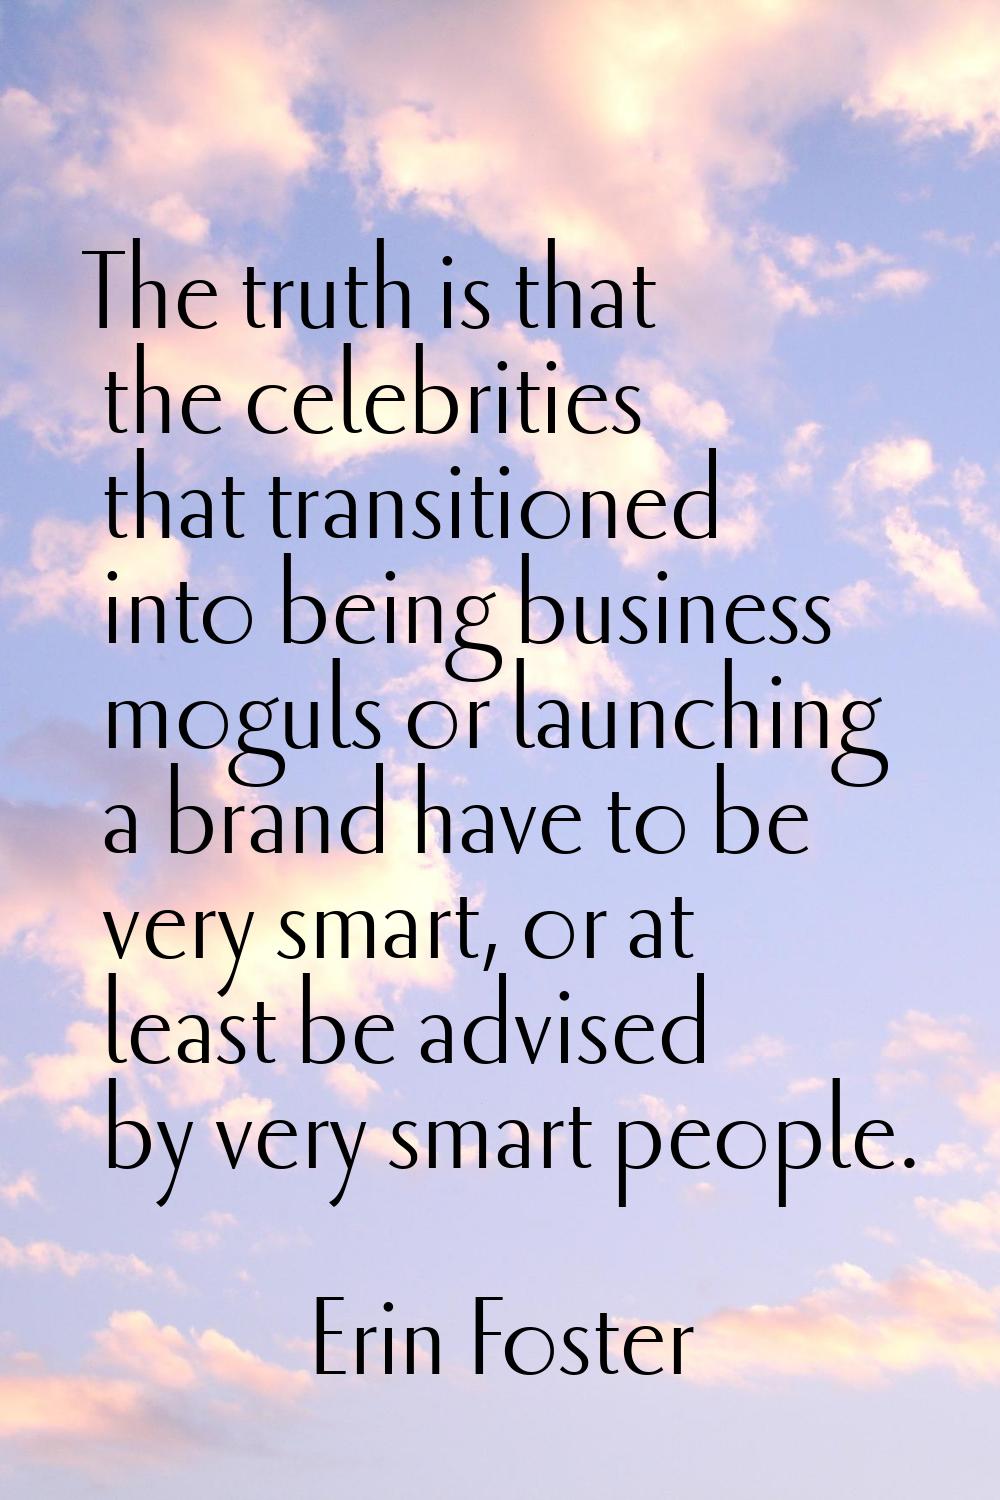 The truth is that the celebrities that transitioned into being business moguls or launching a brand